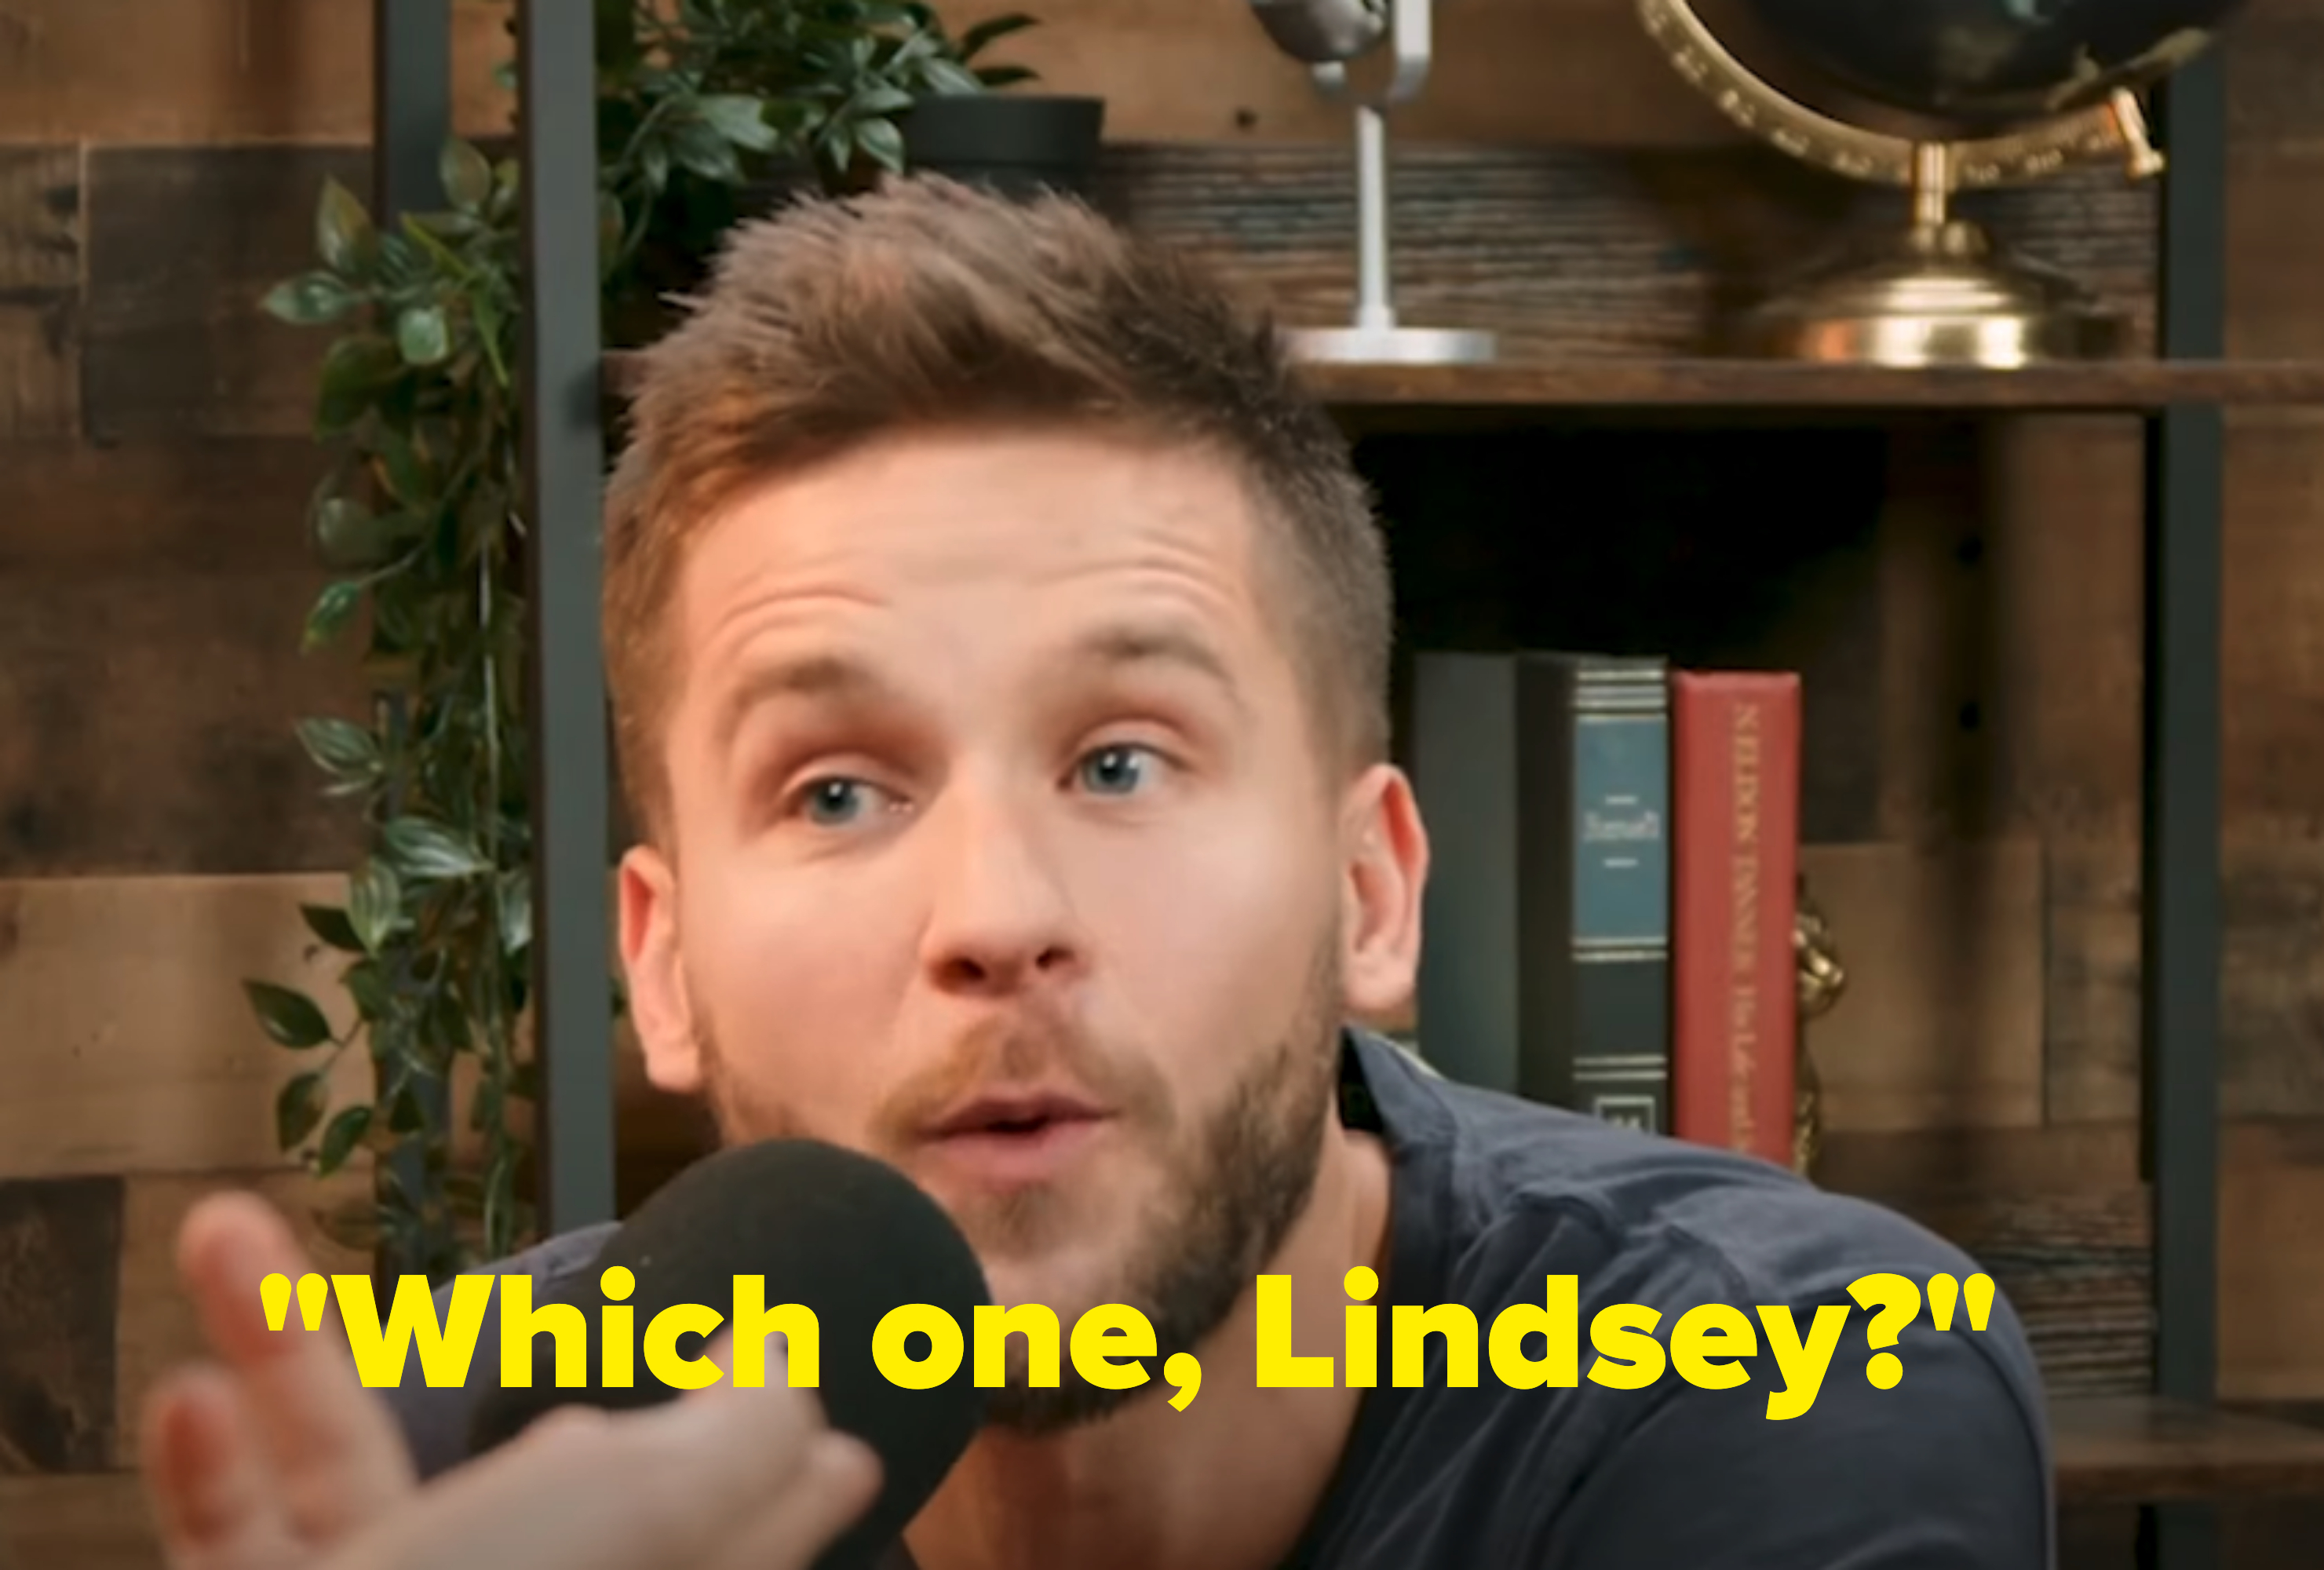 &quot;Which one, Lindsey?&quot;